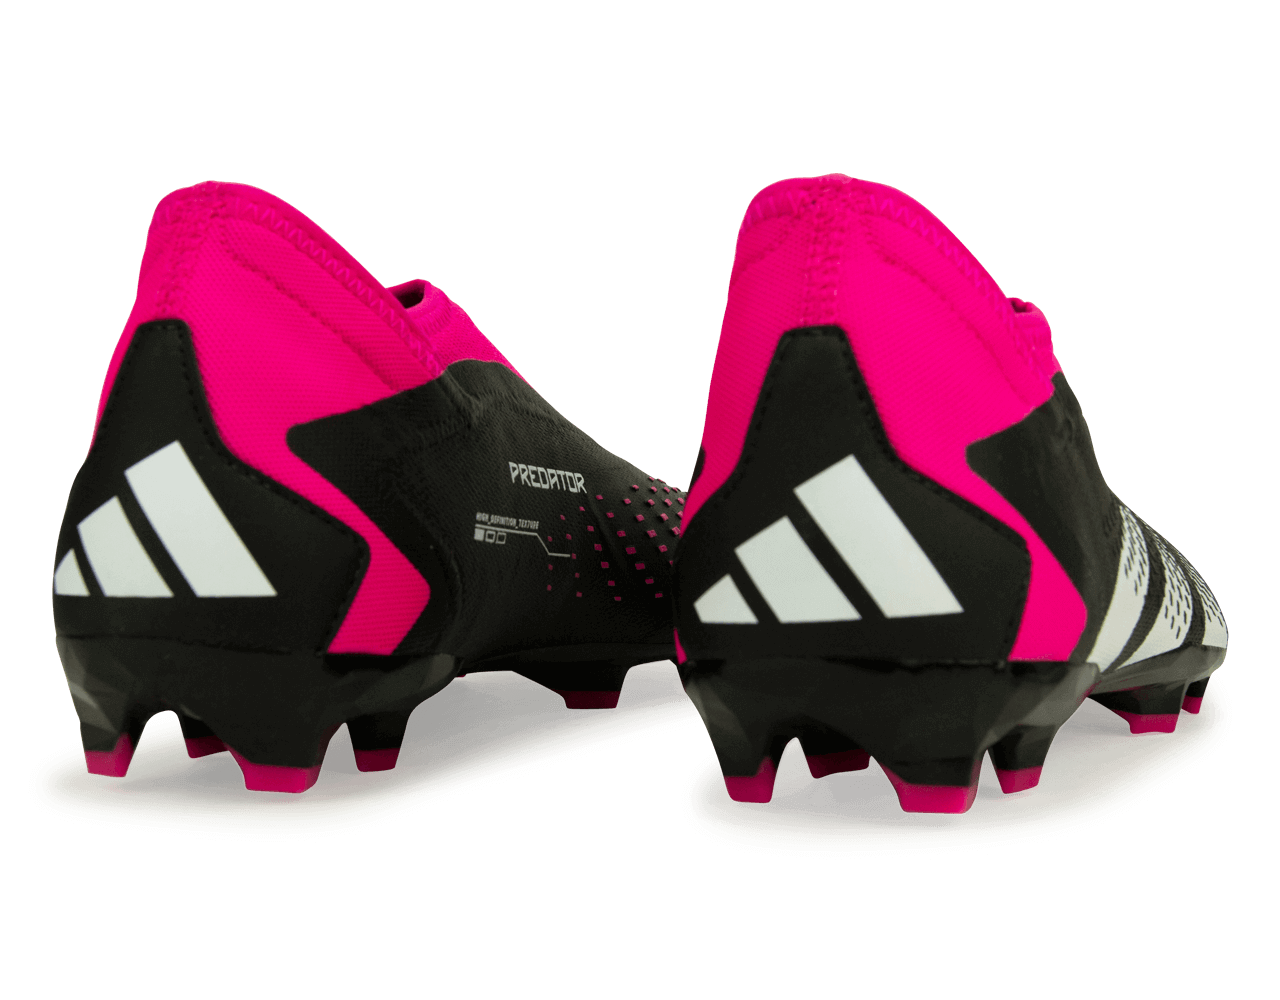 Adidas Predator Accuracy.3 Laceless FG Firm Ground Soccer Cleats Black/White/Pink - Size 8.5